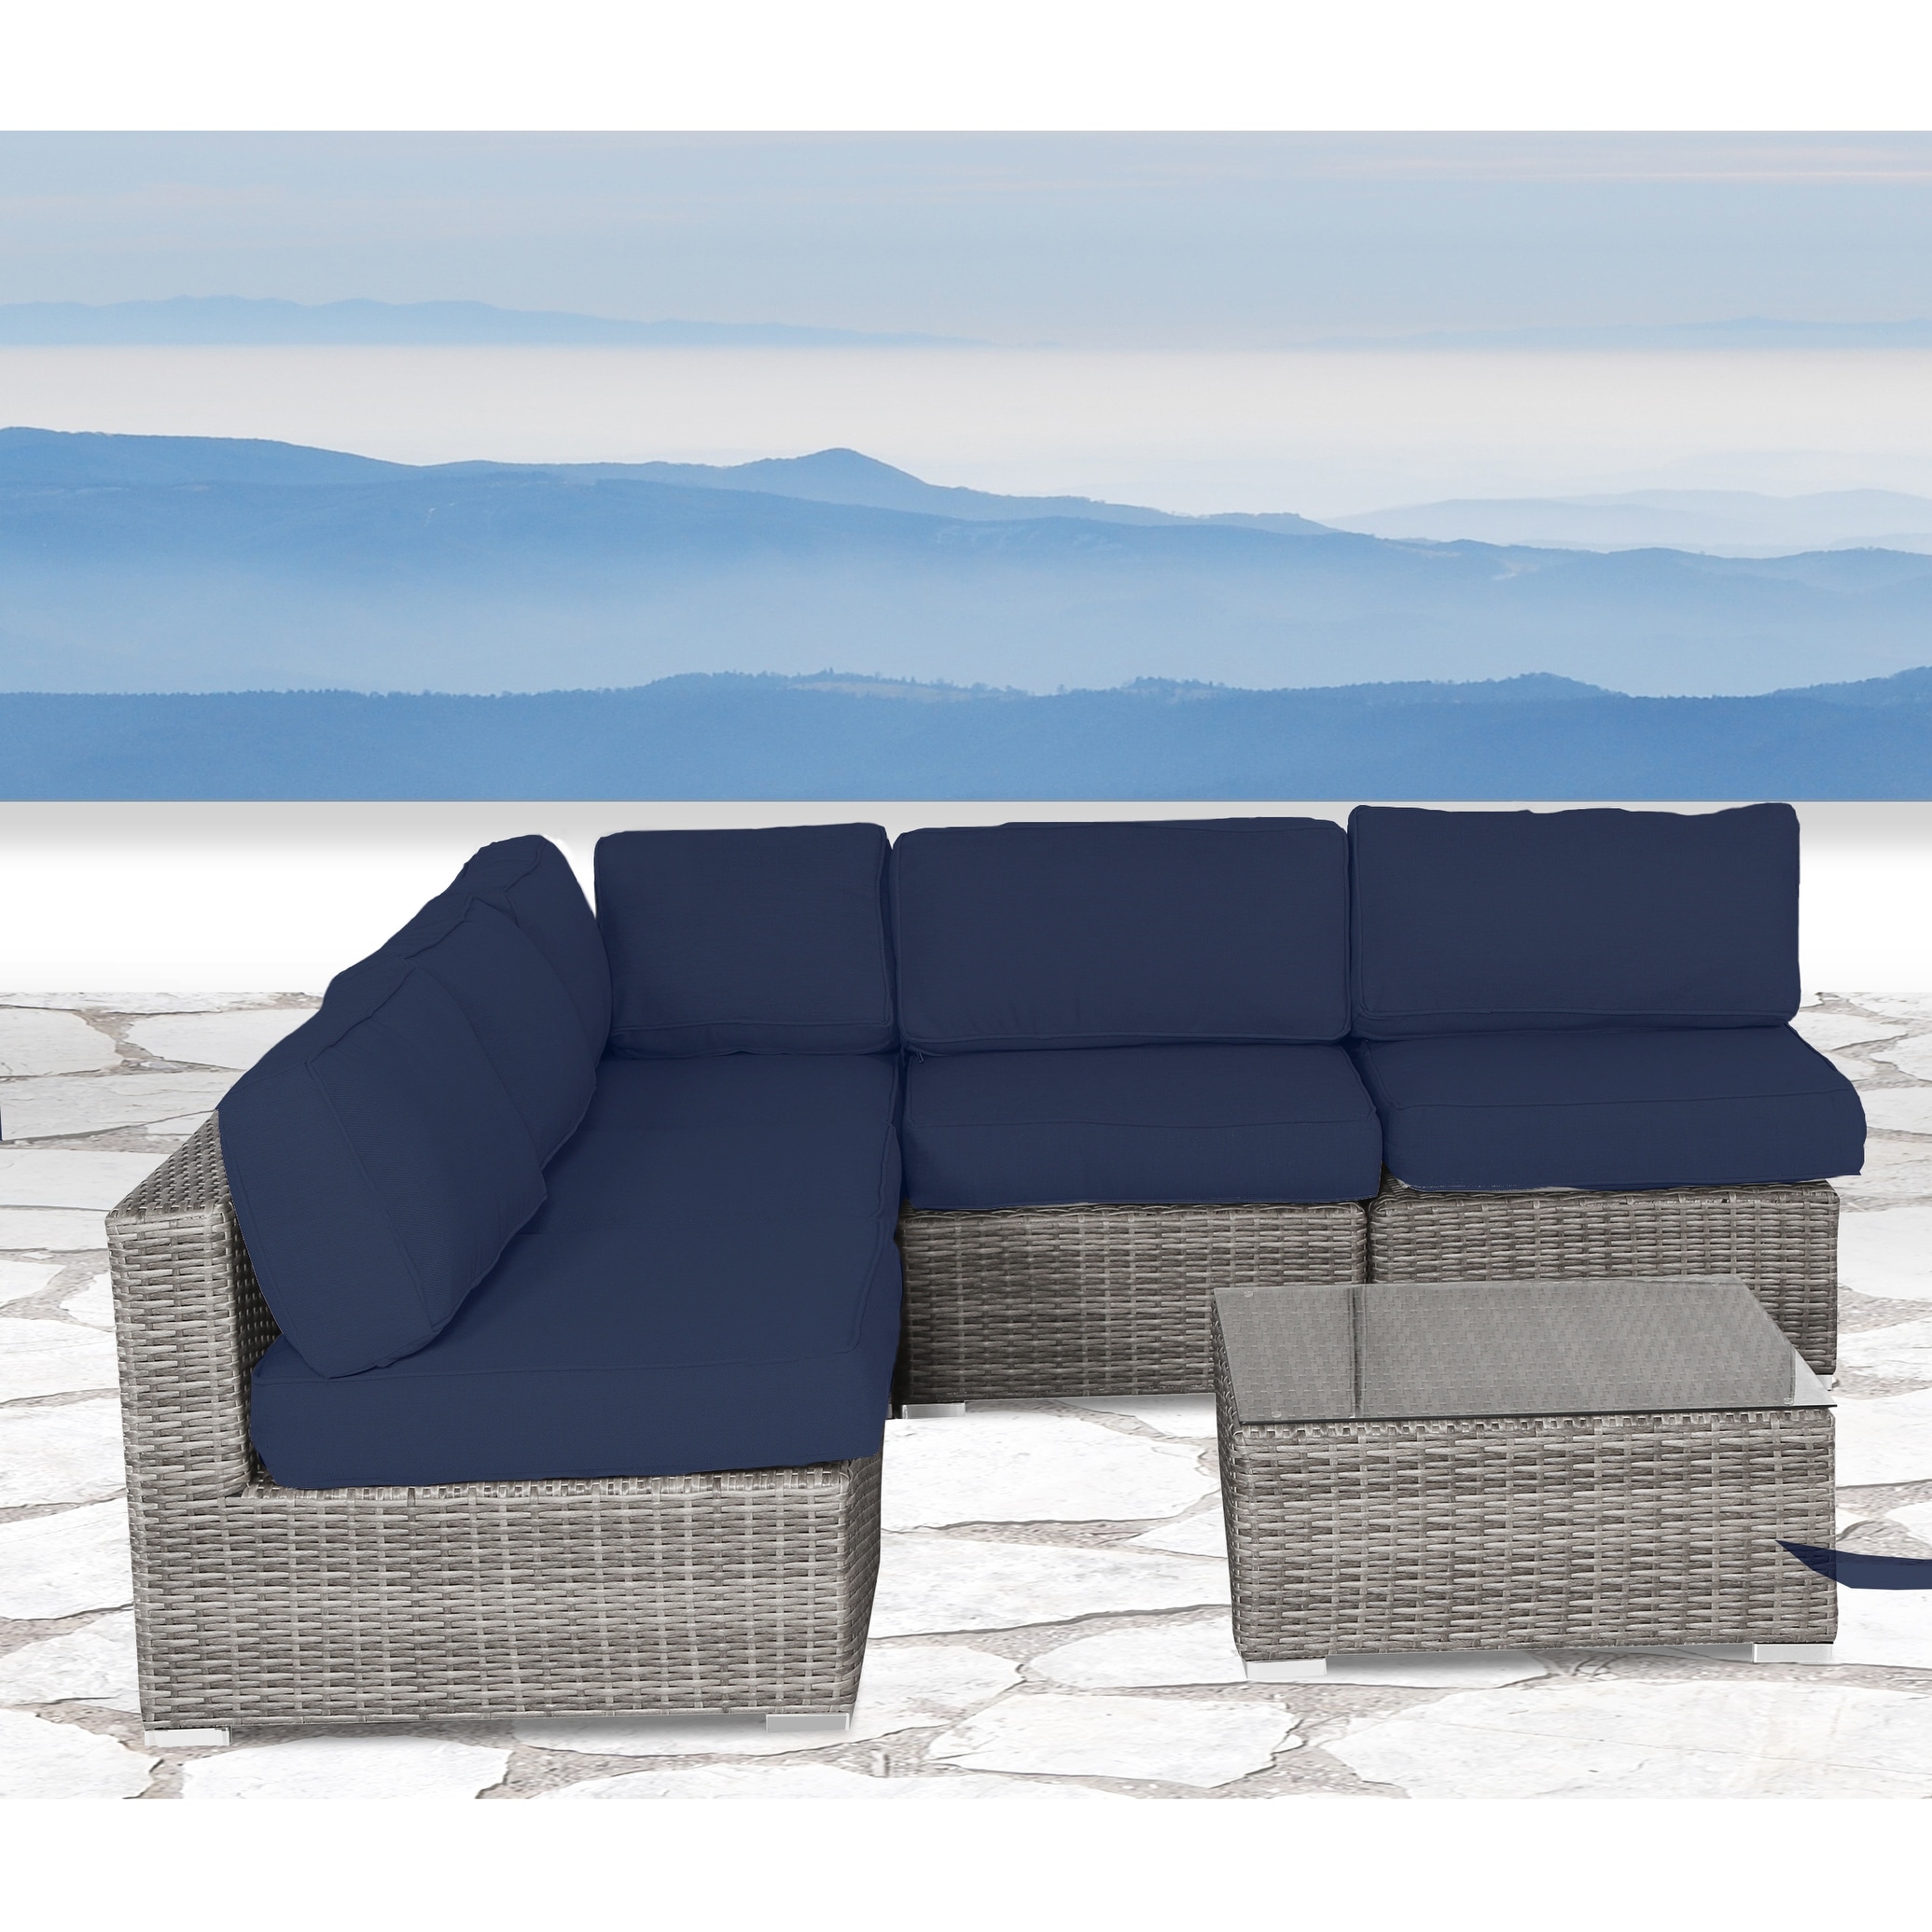 Lsi 6 Piece Sectional Seating Group With Cushions